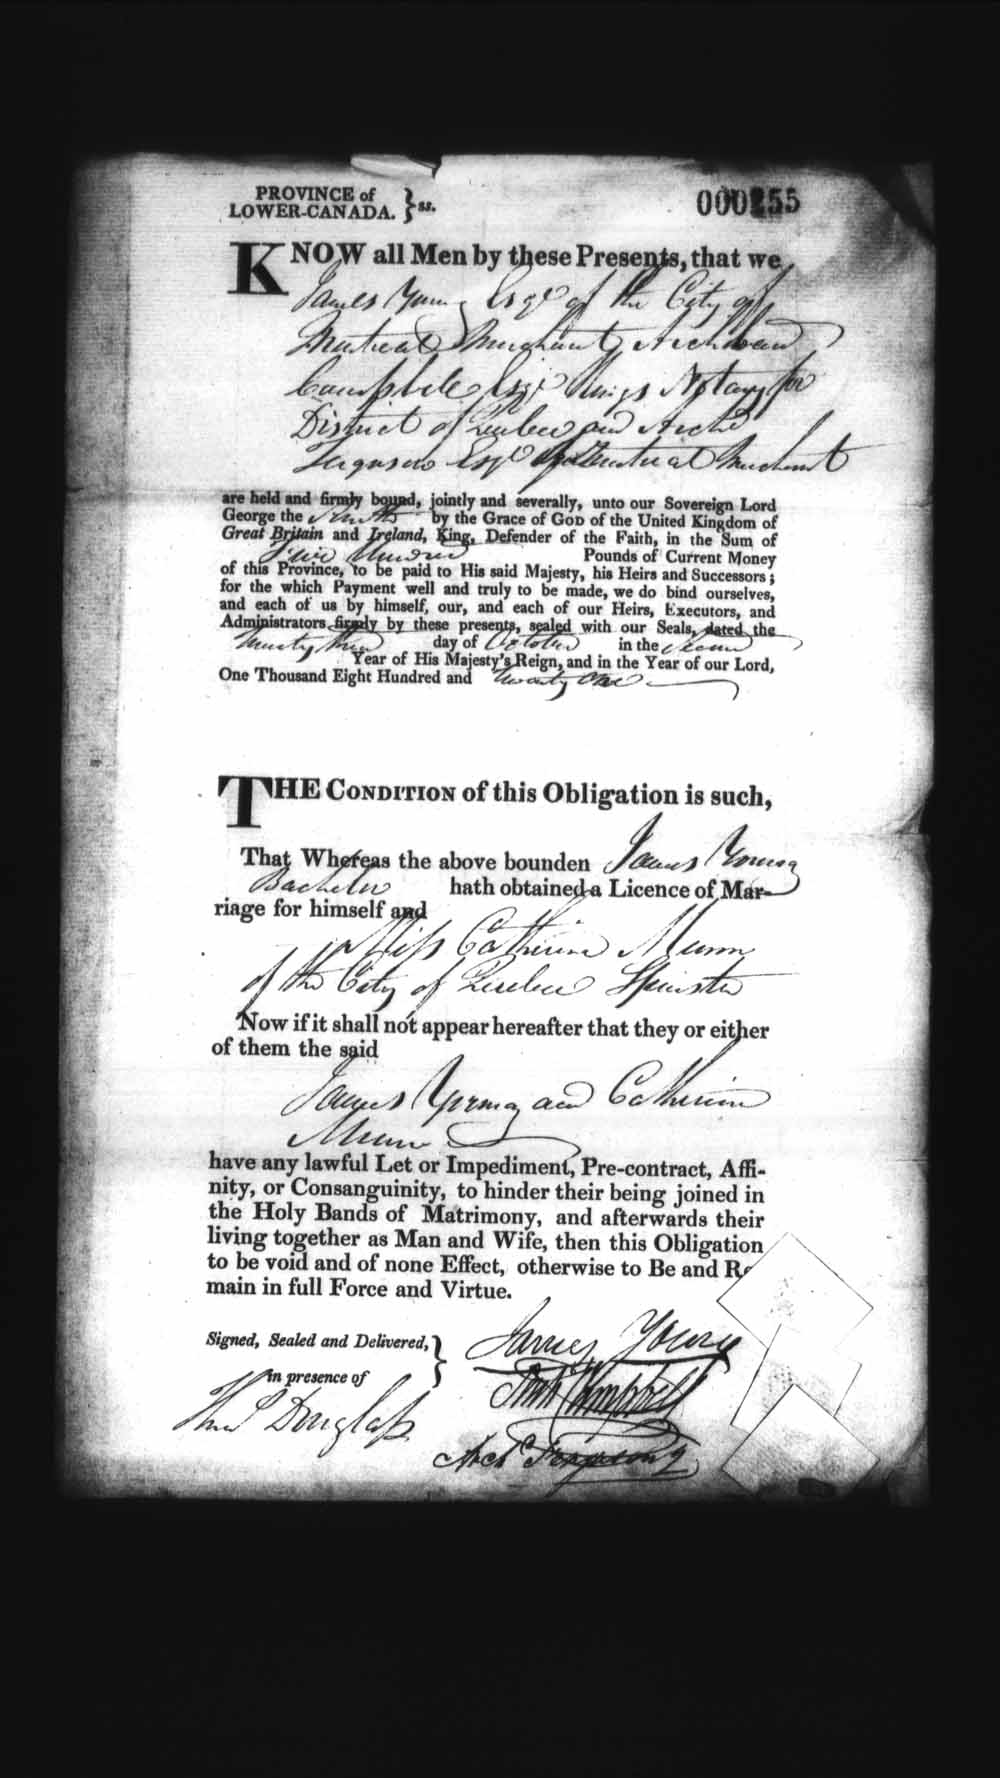 Digitized page of Upper and Lower Canada Marriage Bonds (1779-1865) for Image No.: e008236117